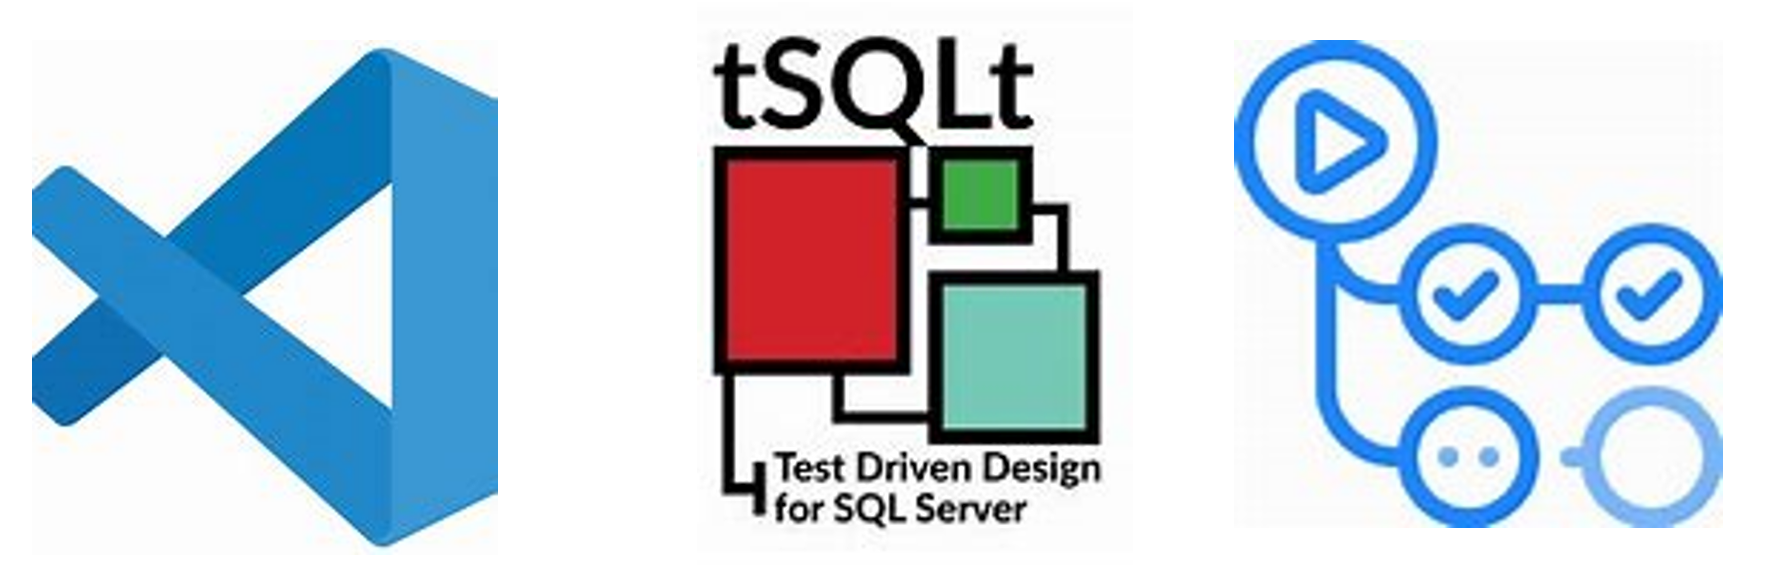 Connecting the Dots of Azure SQL CICD Part 3: Testing with tSQLt